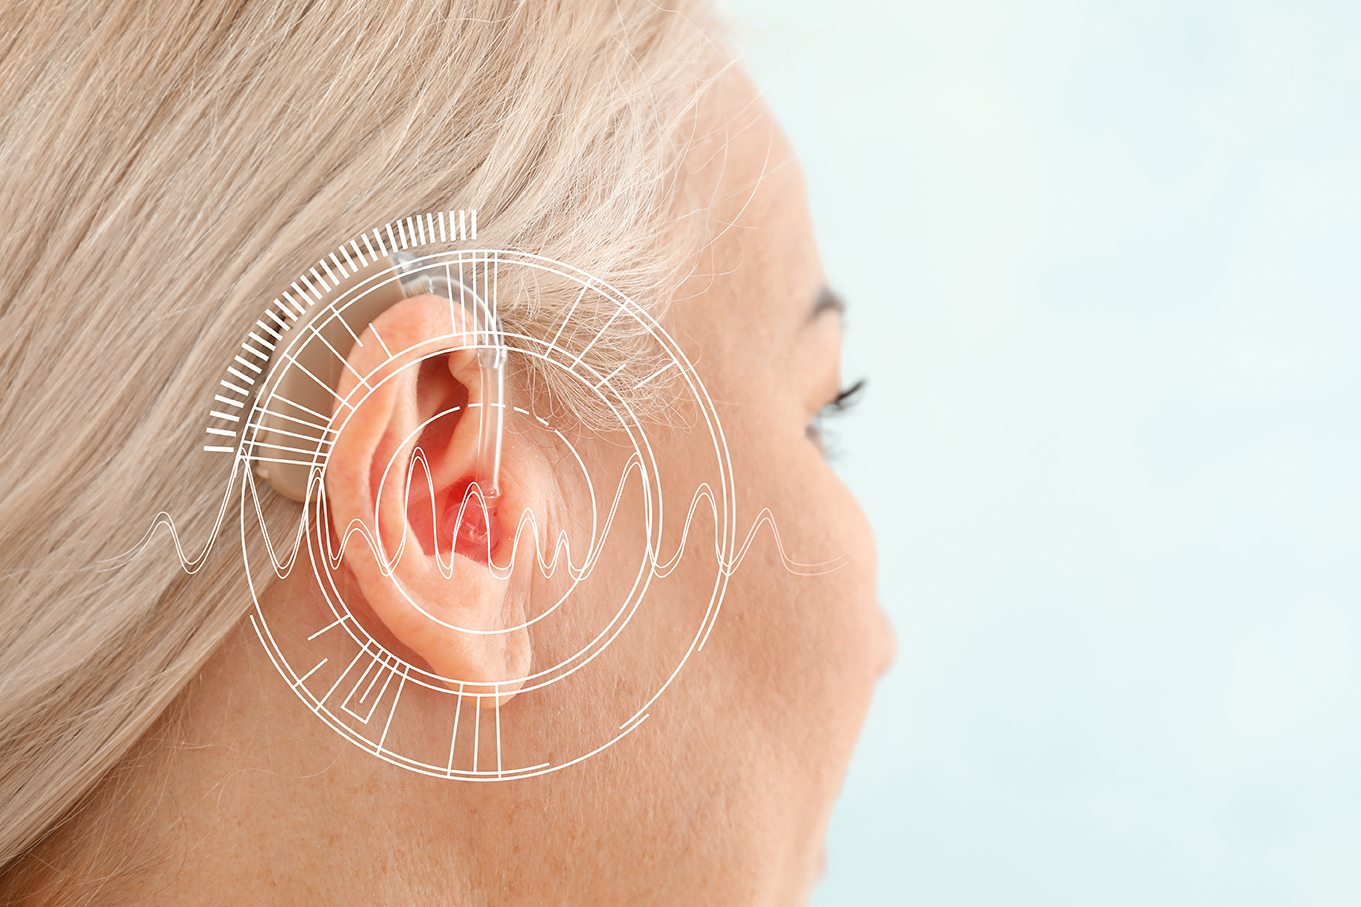 Woman with hearing aid and overlay of technical diagram